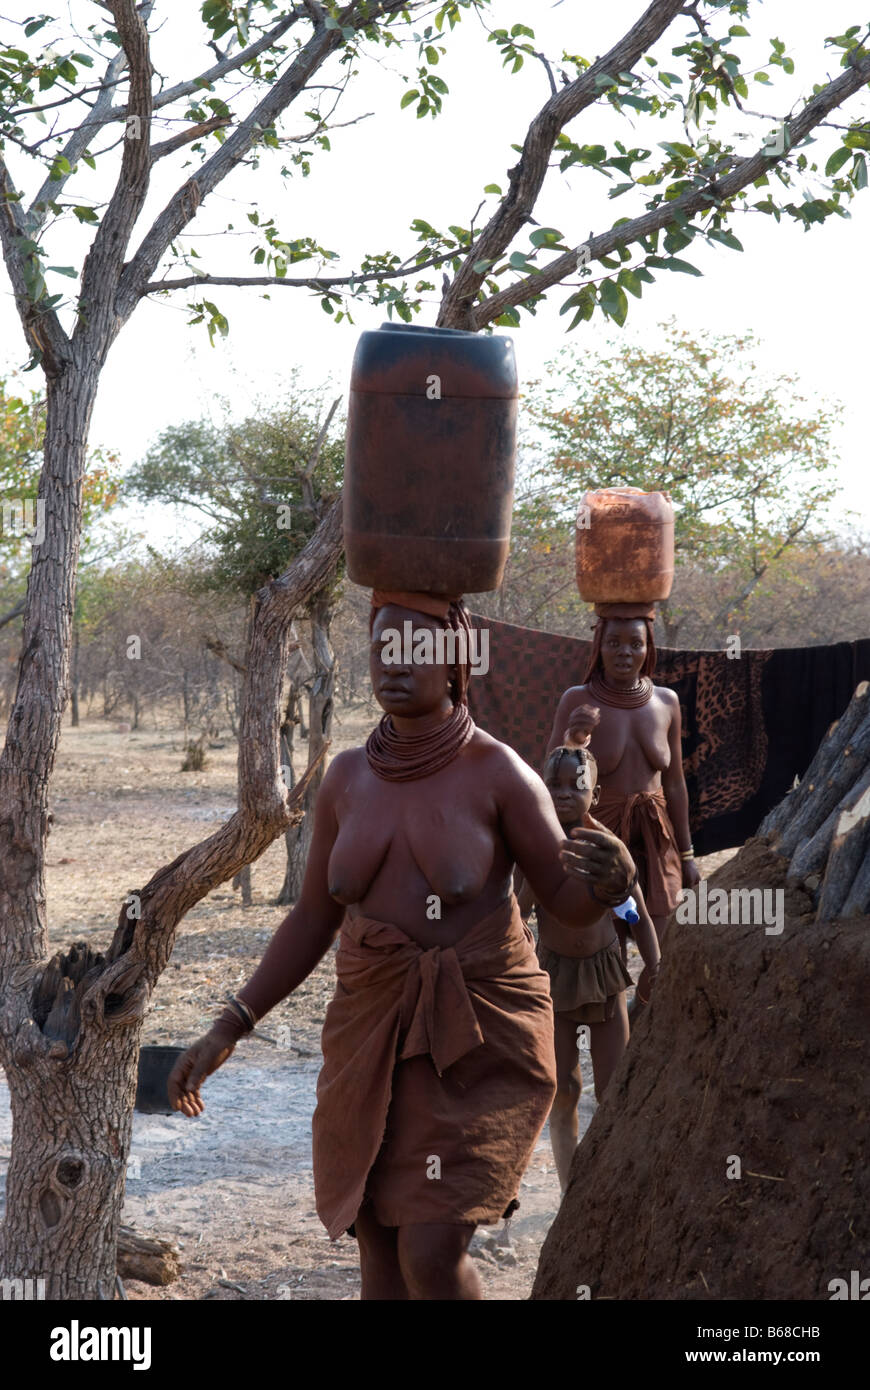 Himba women carry barrels of water on their heads at the Himba Oase Village near Kamanjab, Namibia Stock Photo